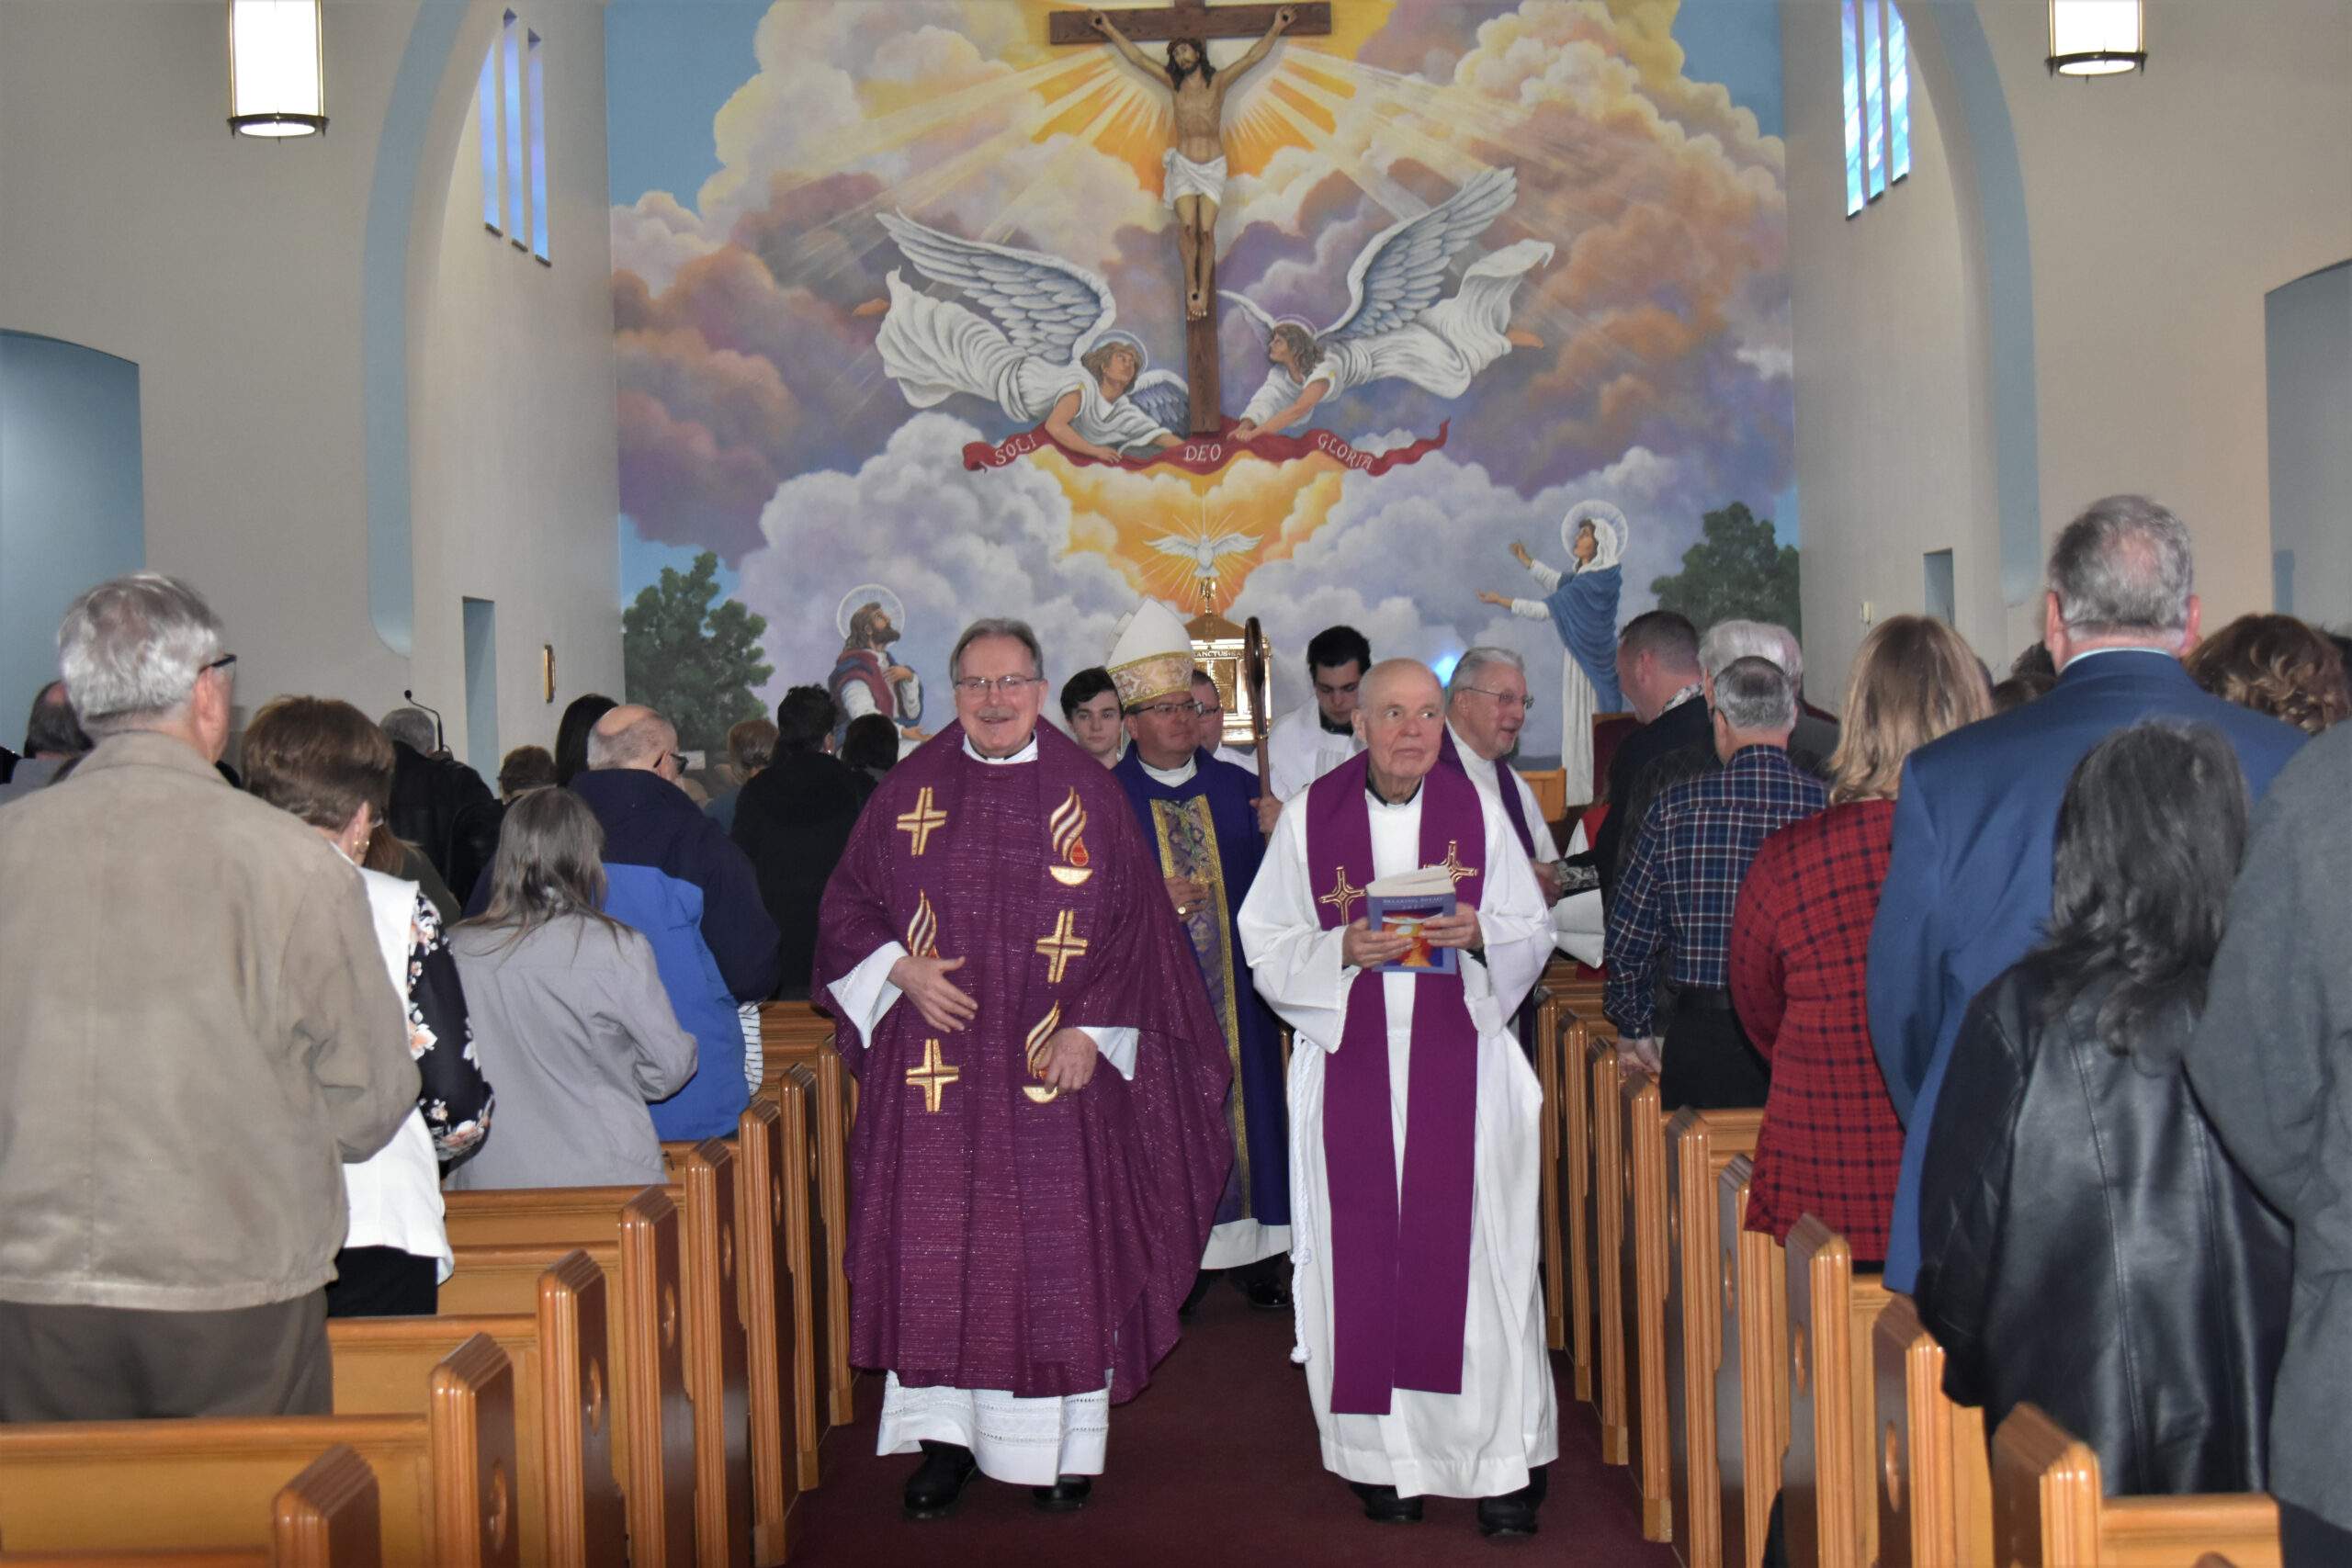 Bishop Bonnar and clergy walk in procession out of the church during the anniversary Mass